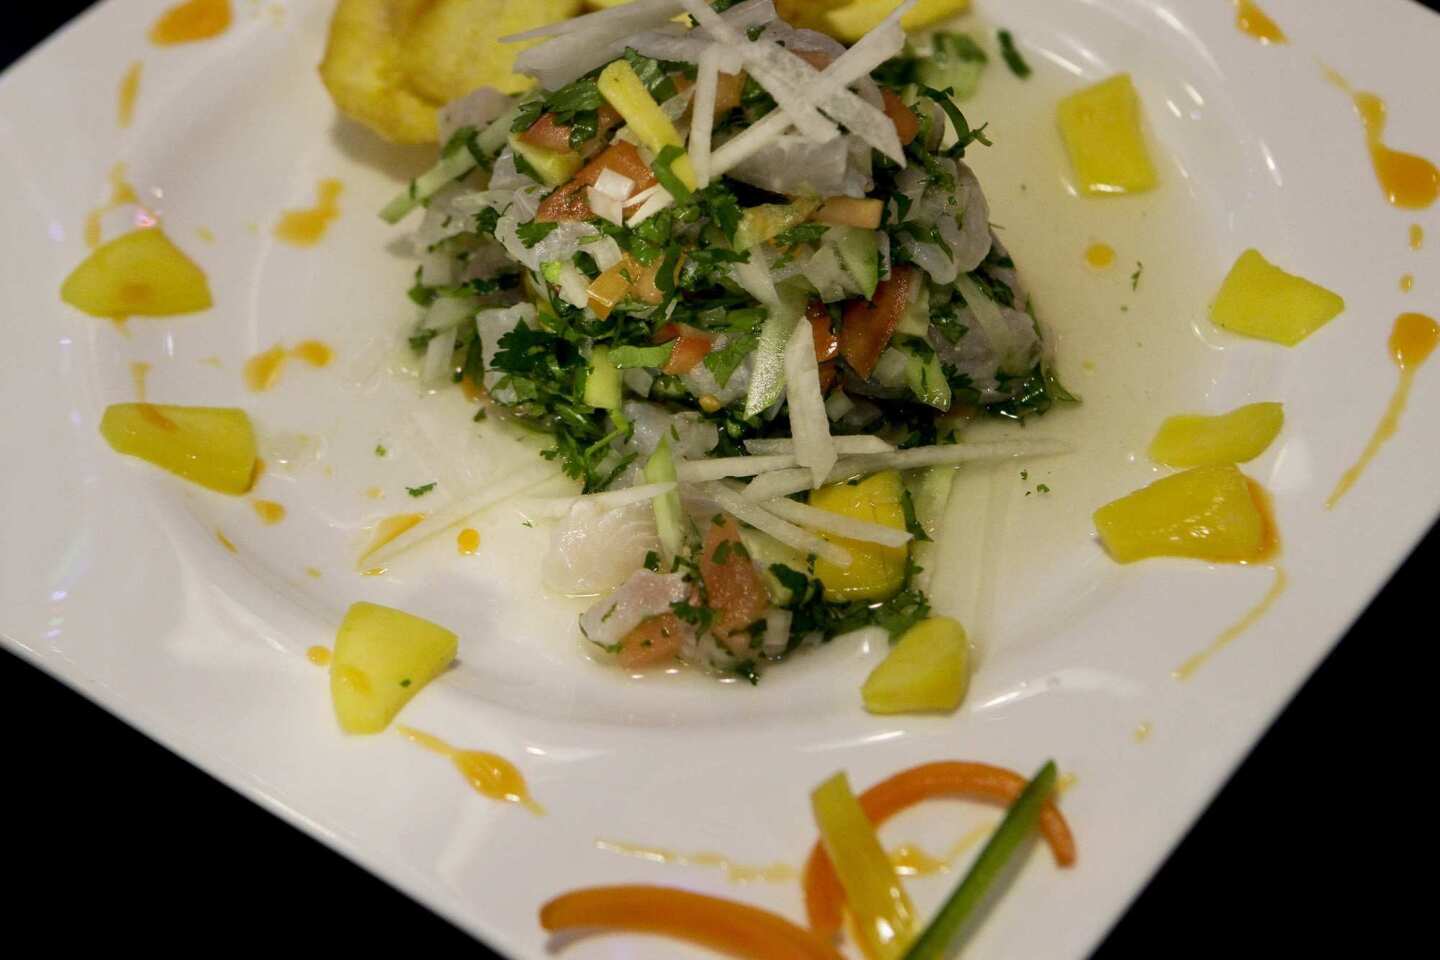 Peruvian ceviche is among the fresh dishes that showcase Gonzalez's experience.